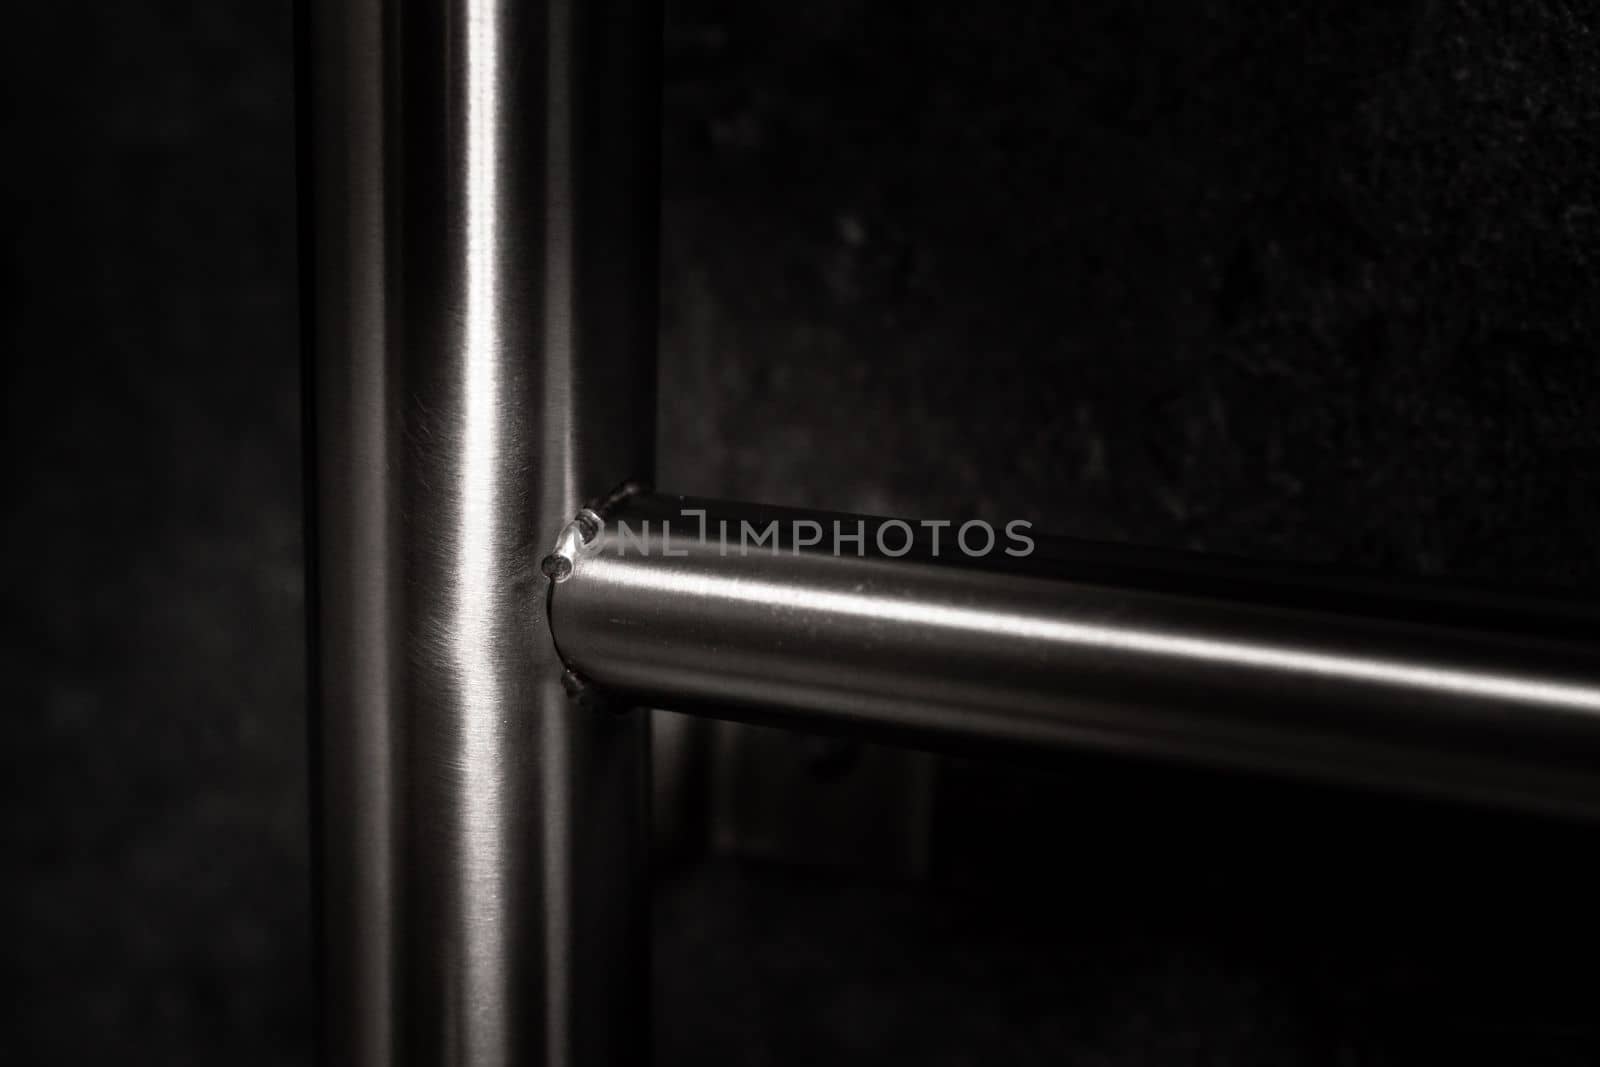 stainless steel railings on a dark background by Edophoto